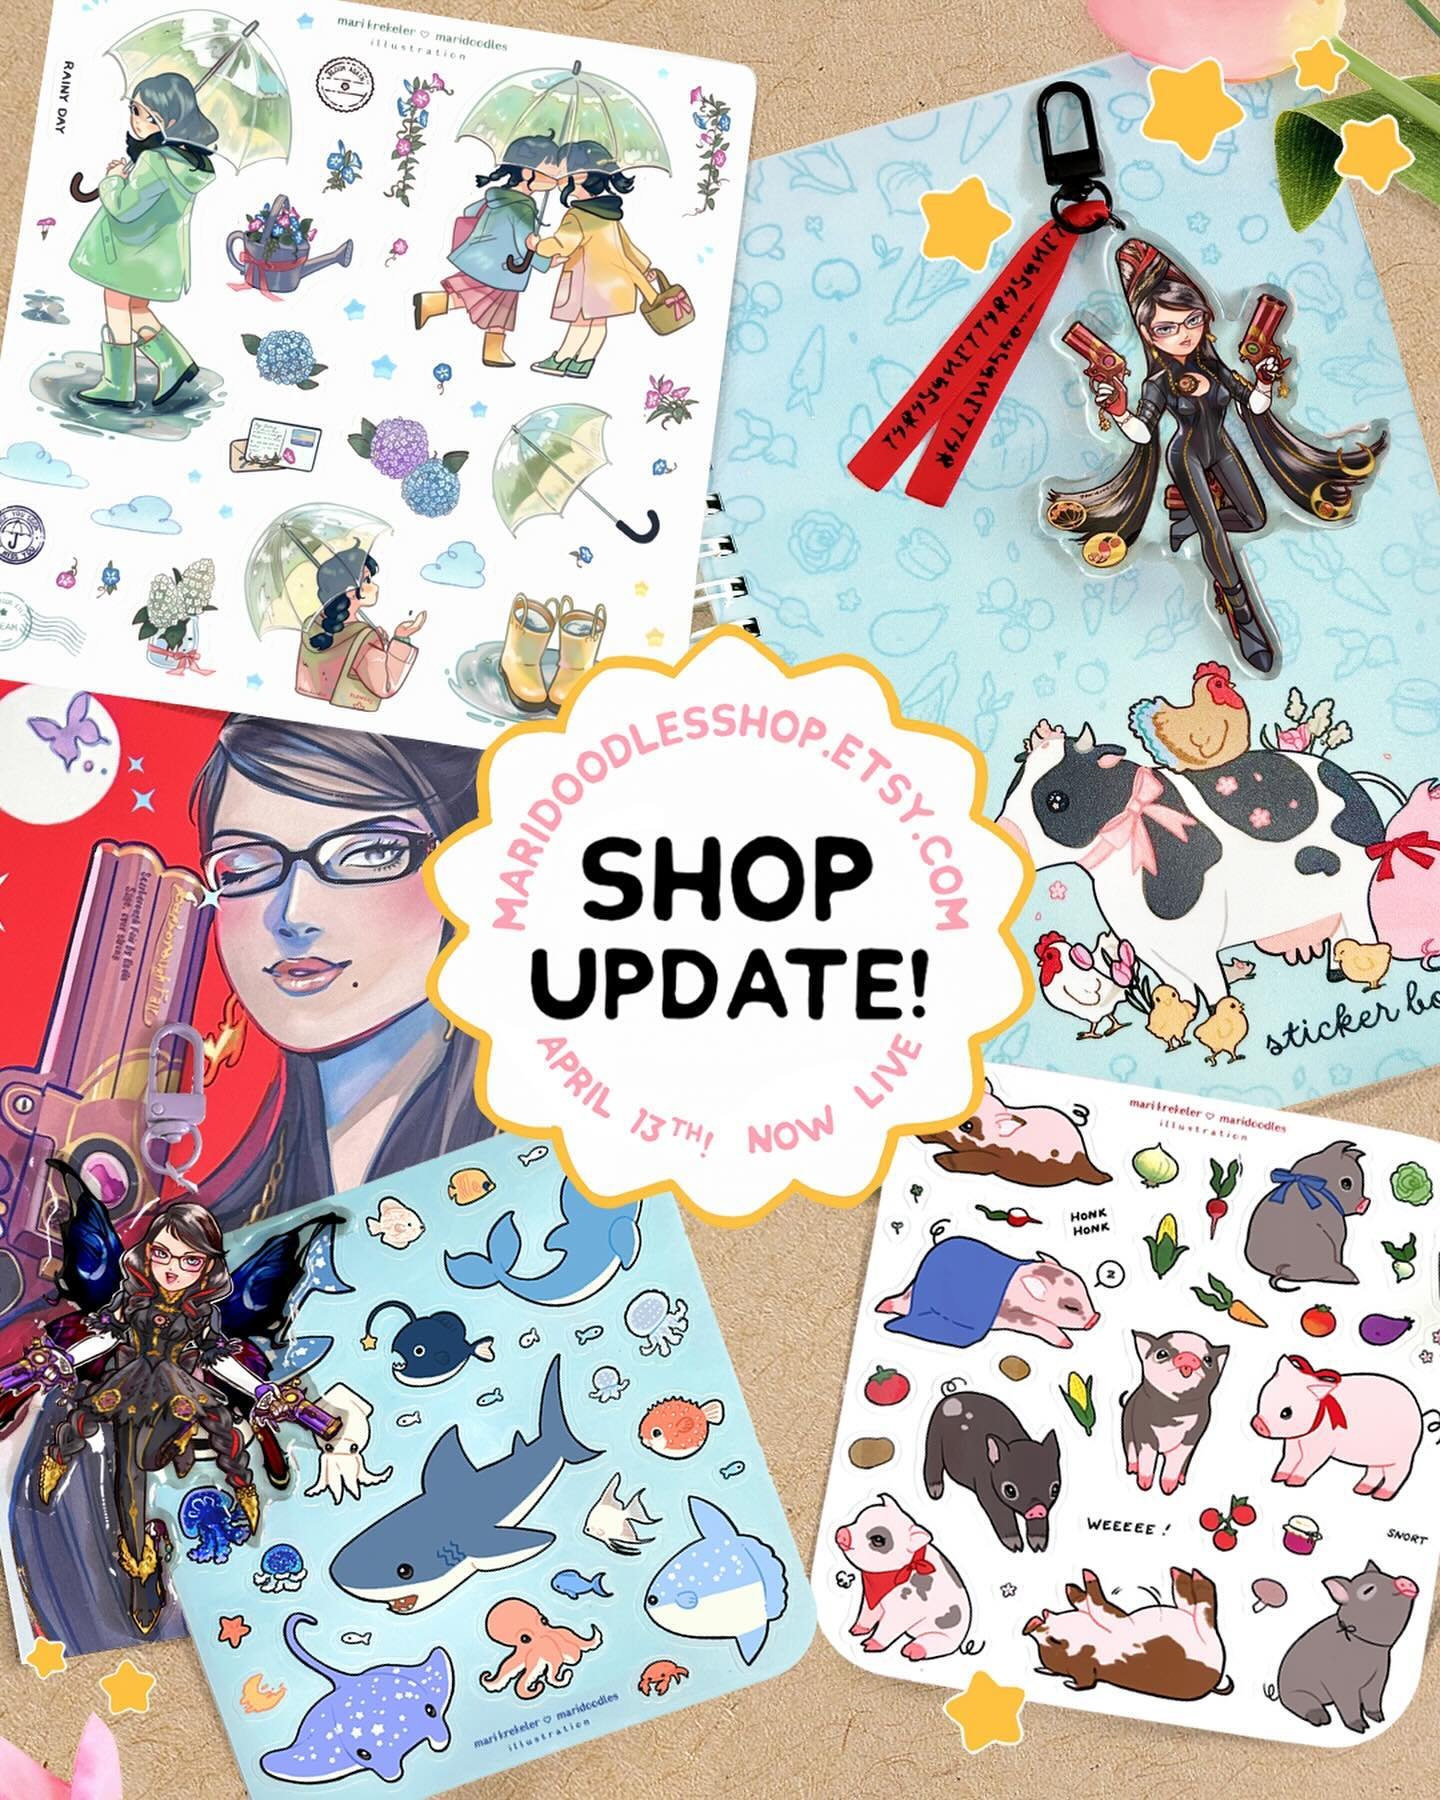 Shop update live! Etsy shop link in bio!
MaridoodlesShop.Etsy.com

Bayonetta 4&rdquo; acrylic charms and prints are now available! New sticker sheets and sticker book!

And restocks on previous sticker books, prints, ff7 charms and more! Thank you fo